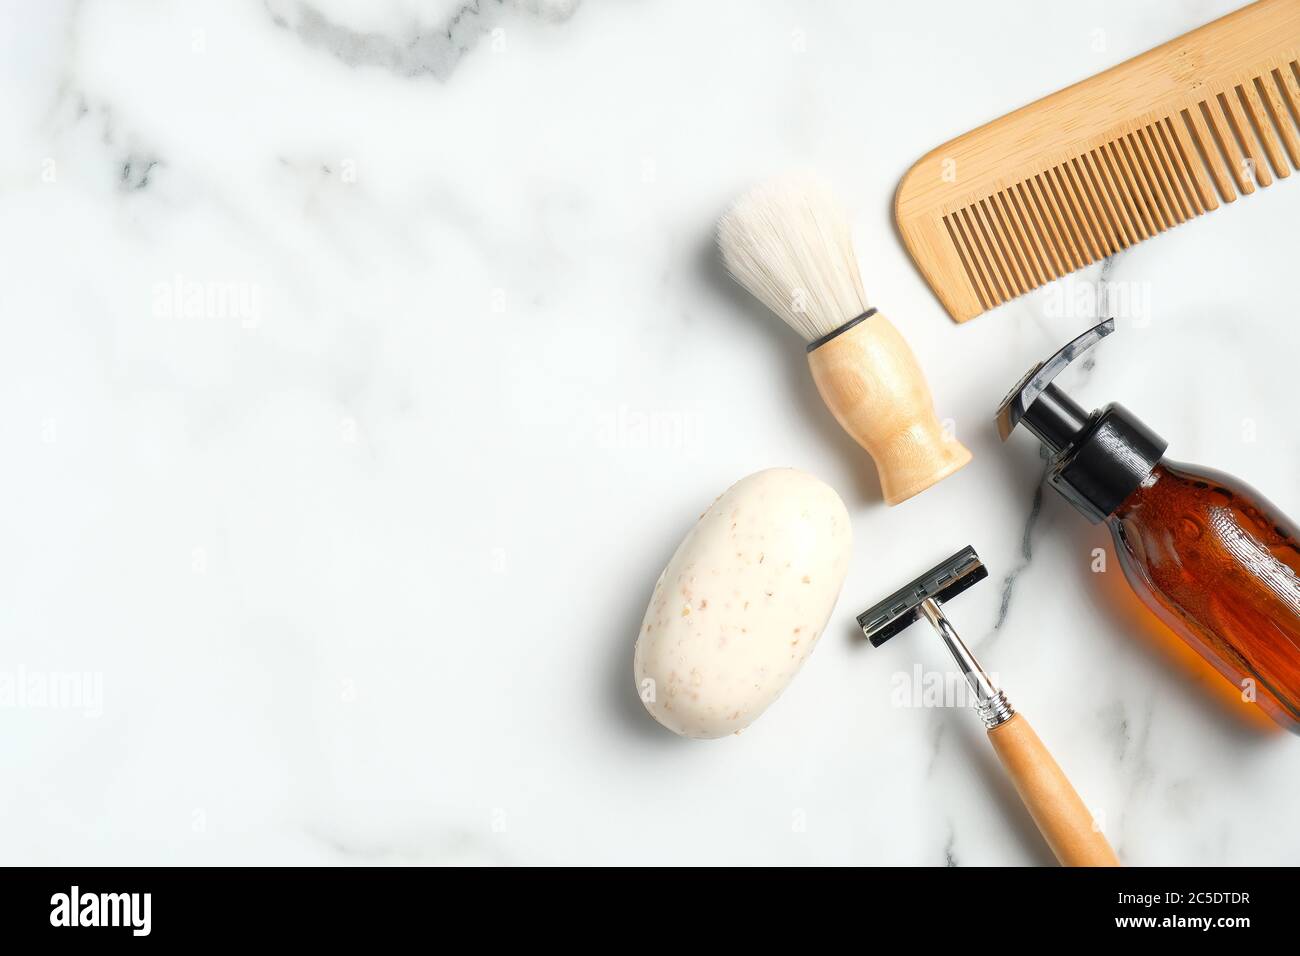 Bestemt Normal Flyve drage Shaving accessories for man on marble table. Flat lay composition with  handmade soap, razor, shaving brush, bottle with foam gel, wooden hair comb  Stock Photo - Alamy